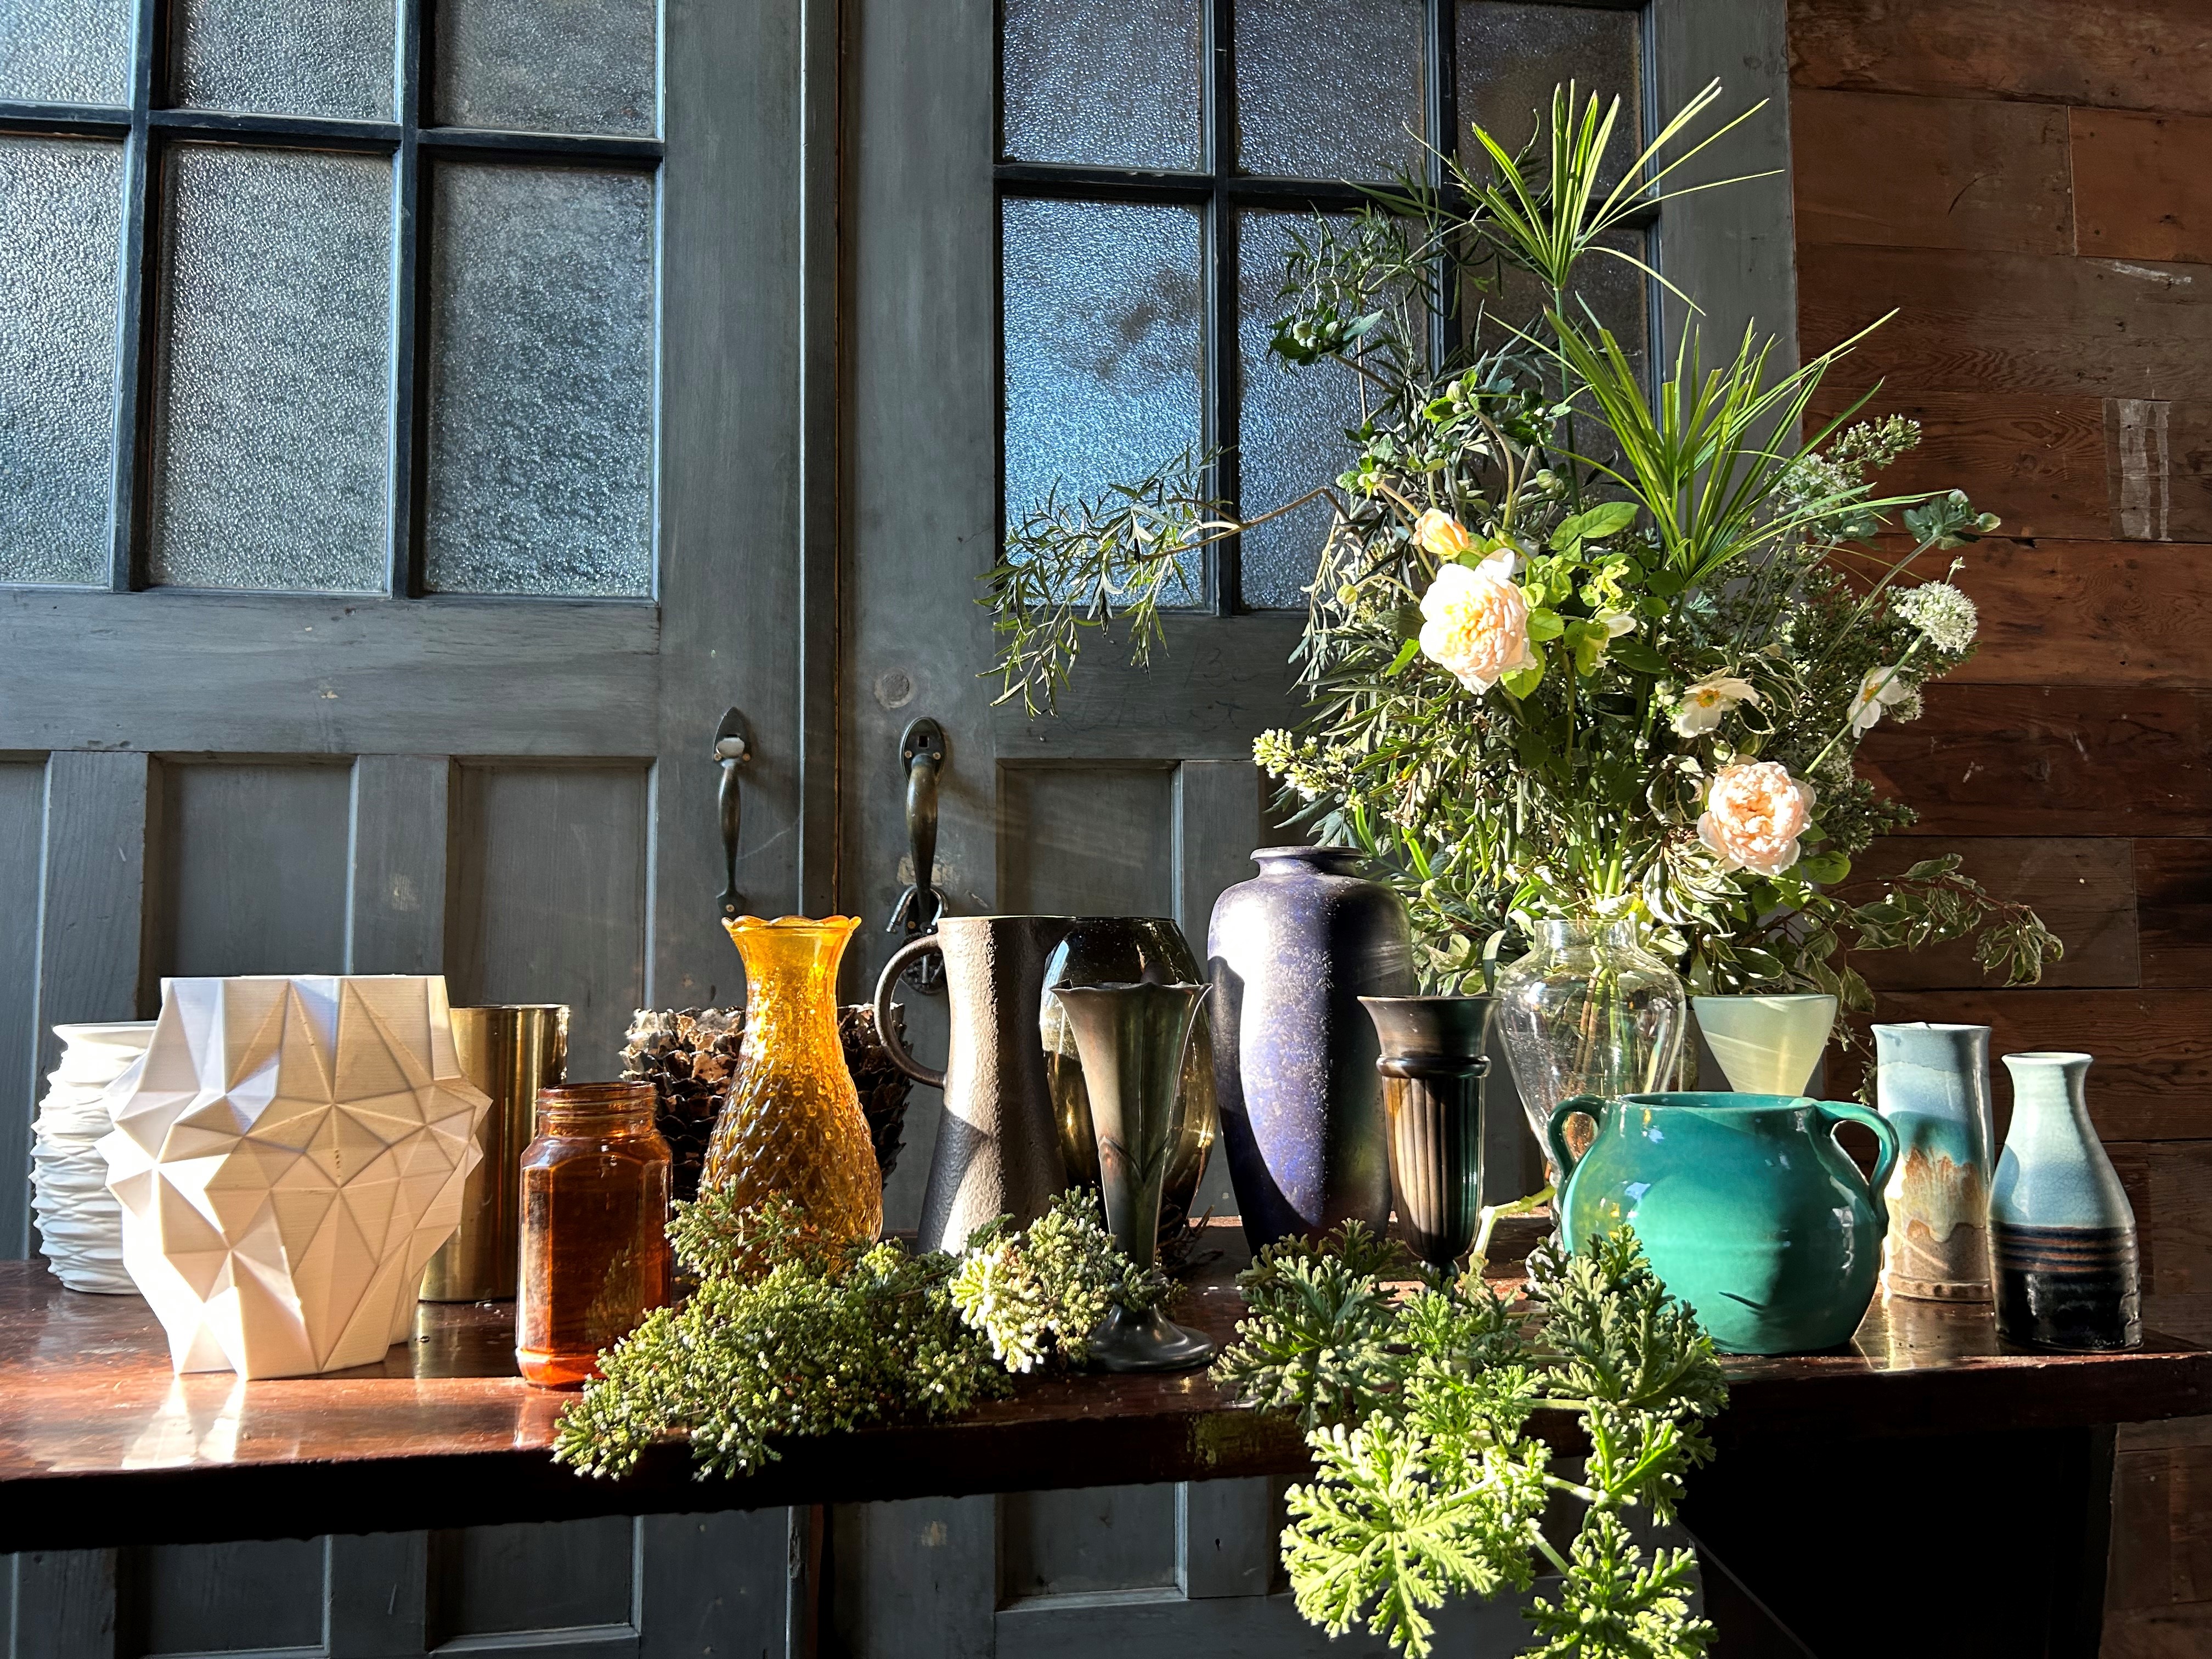 A collection of vases on a shelf ledge, filled with Zinc House Farm flowers